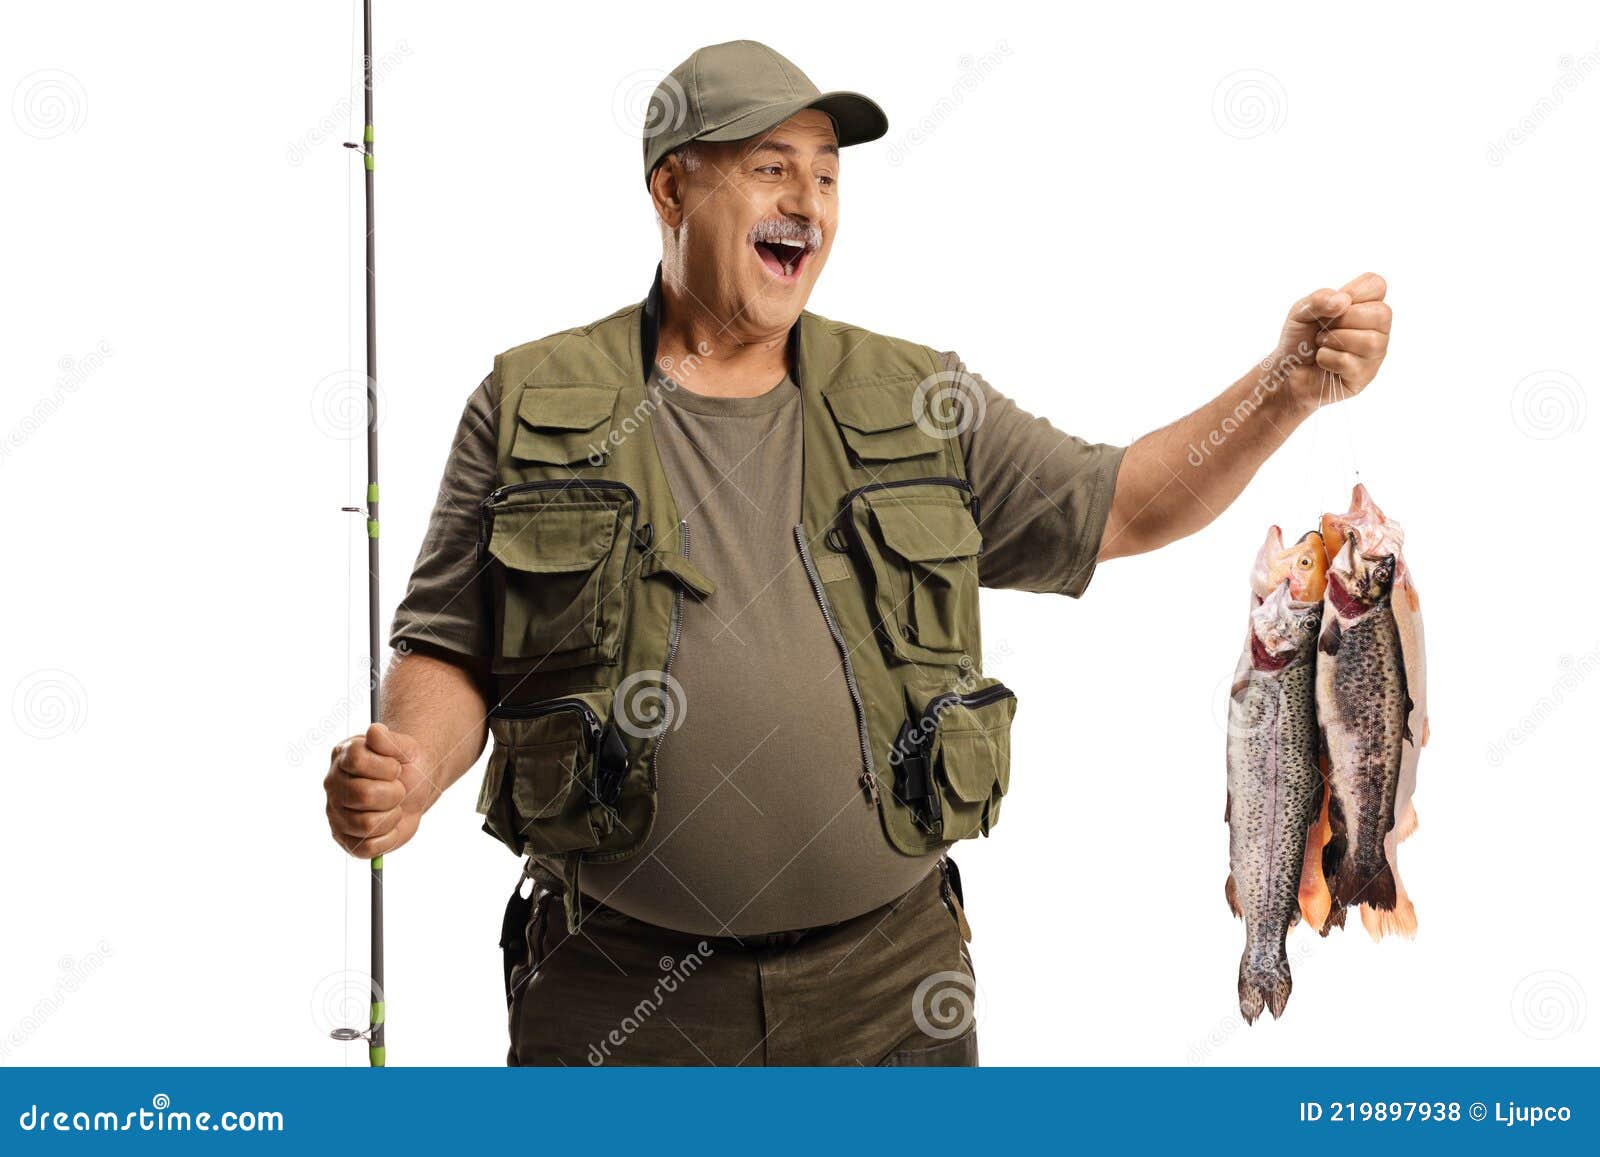 https://thumbs.dreamstime.com/z/happy-fisherman-holding-many-fish-hook-isolated-white-background-219897938.jpg